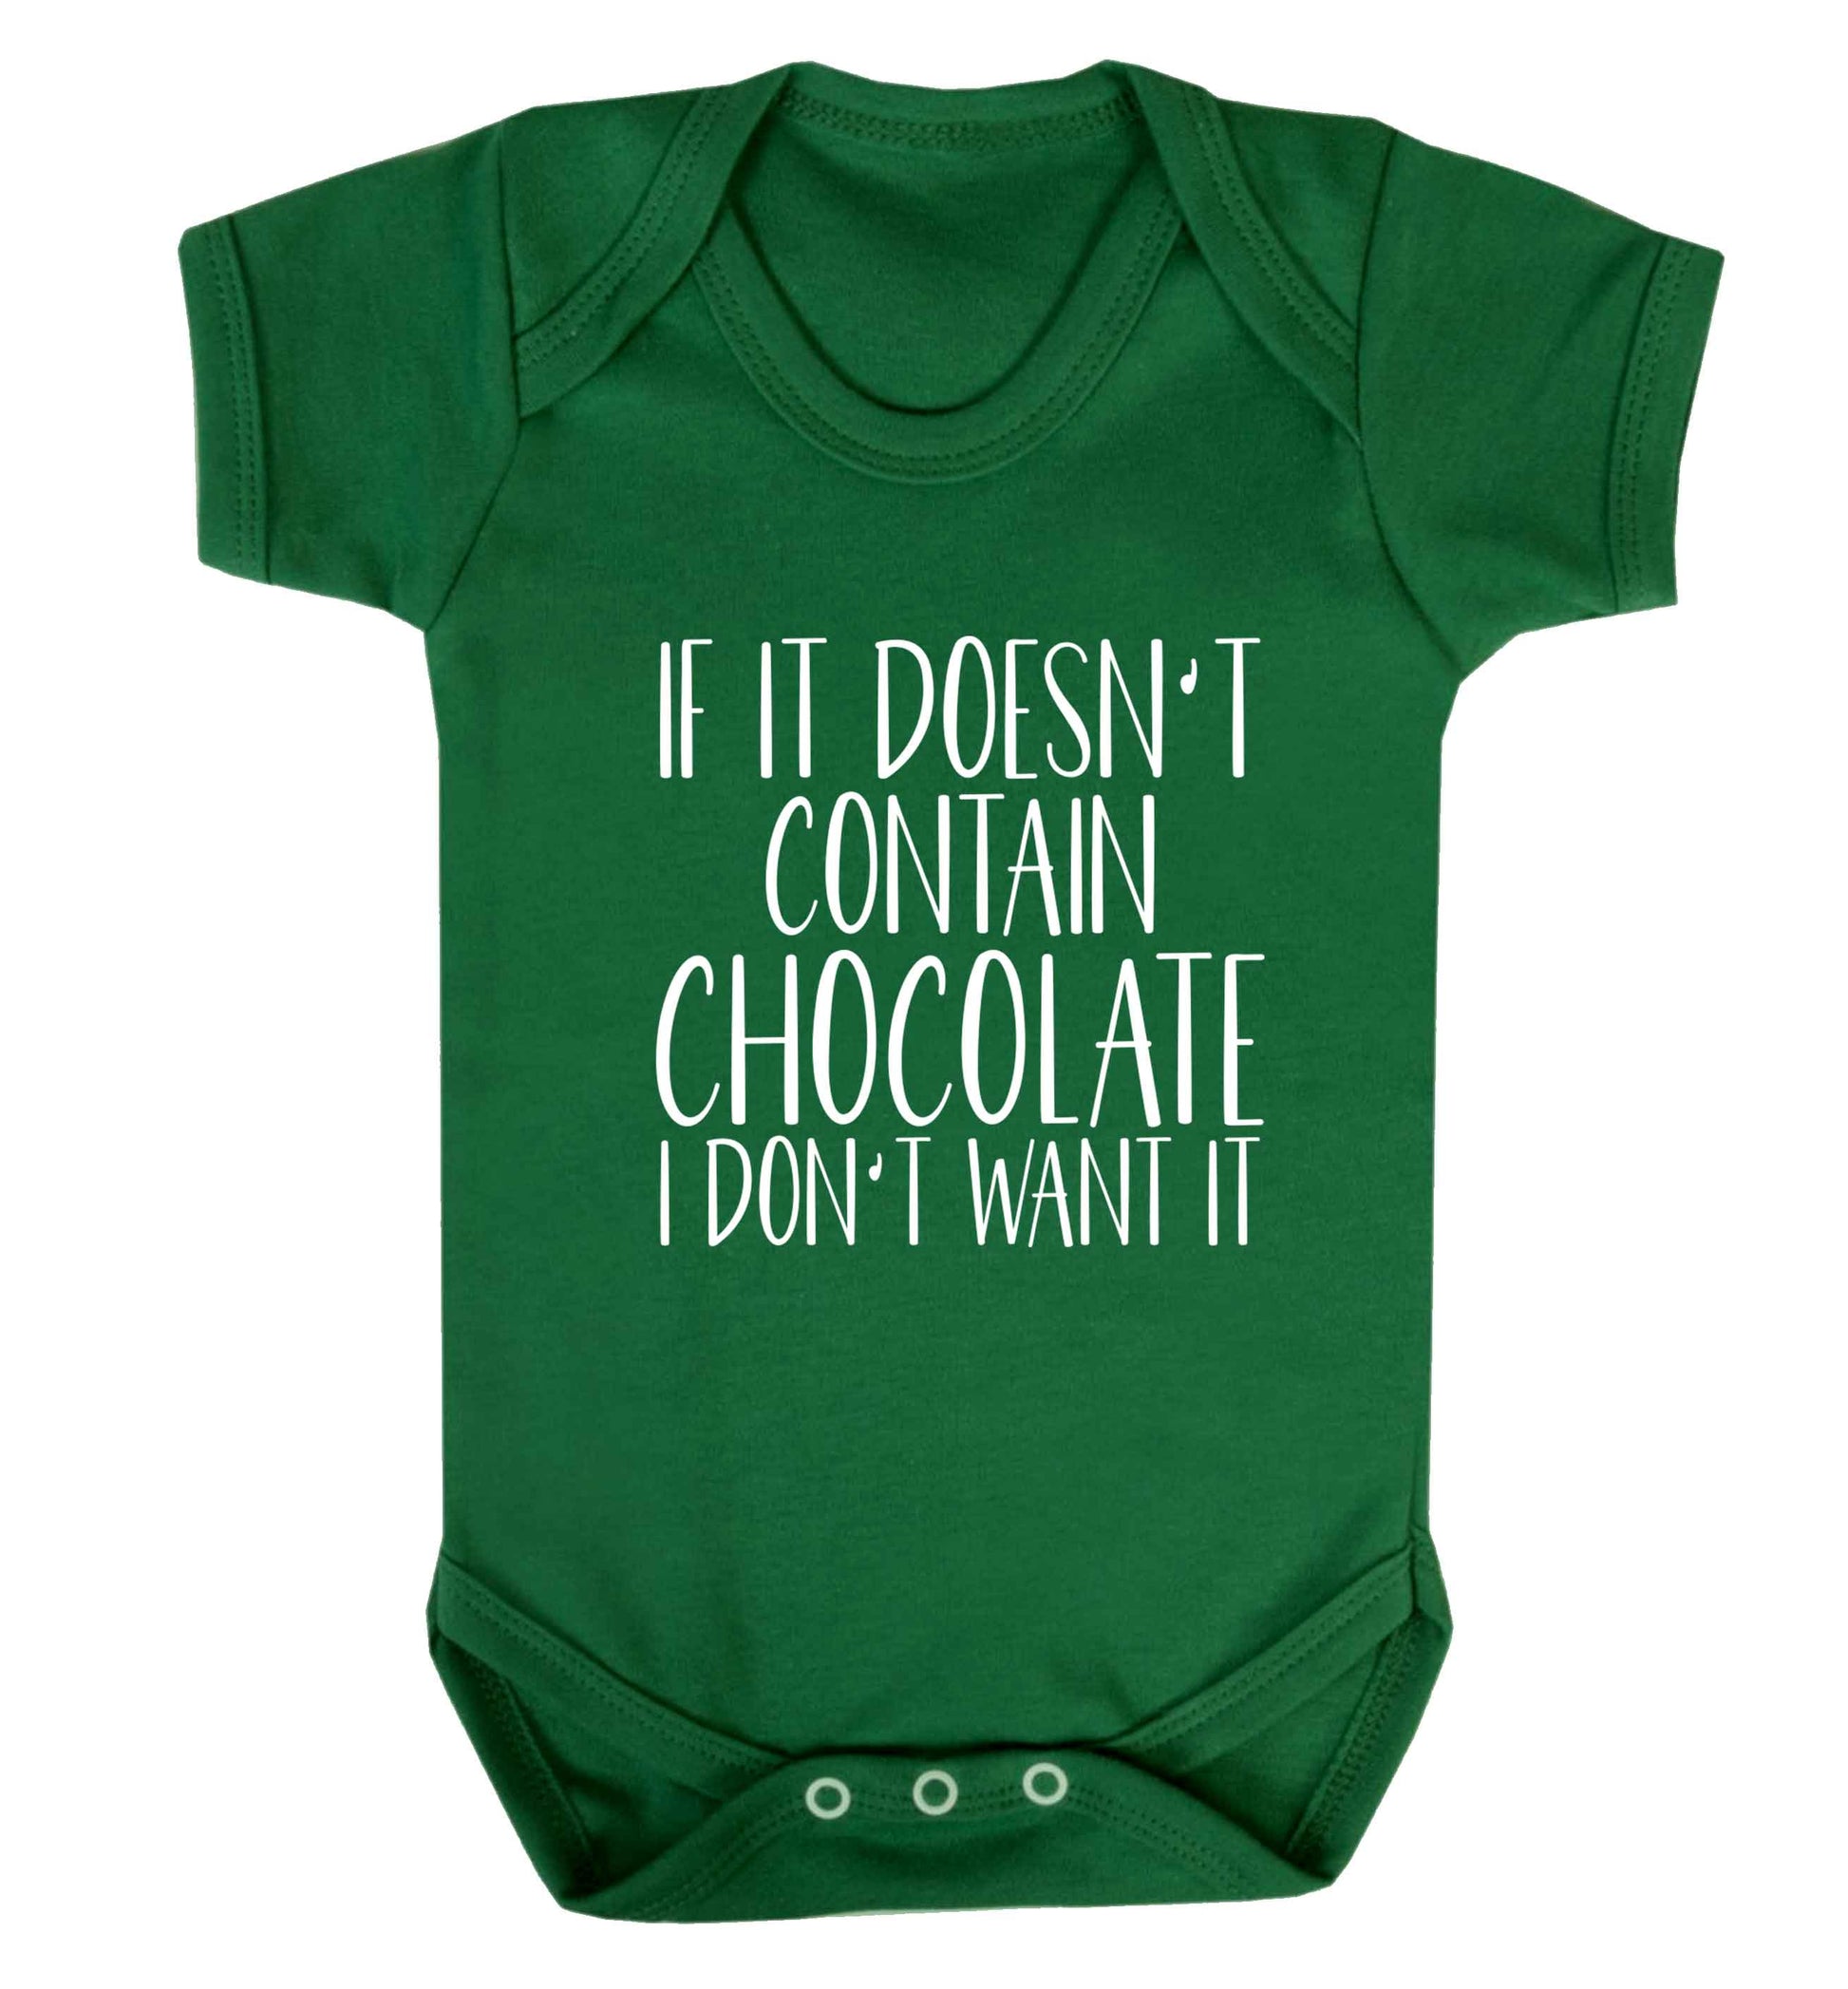 If it doesn't contain chocolate I don't want it baby vest green 18-24 months